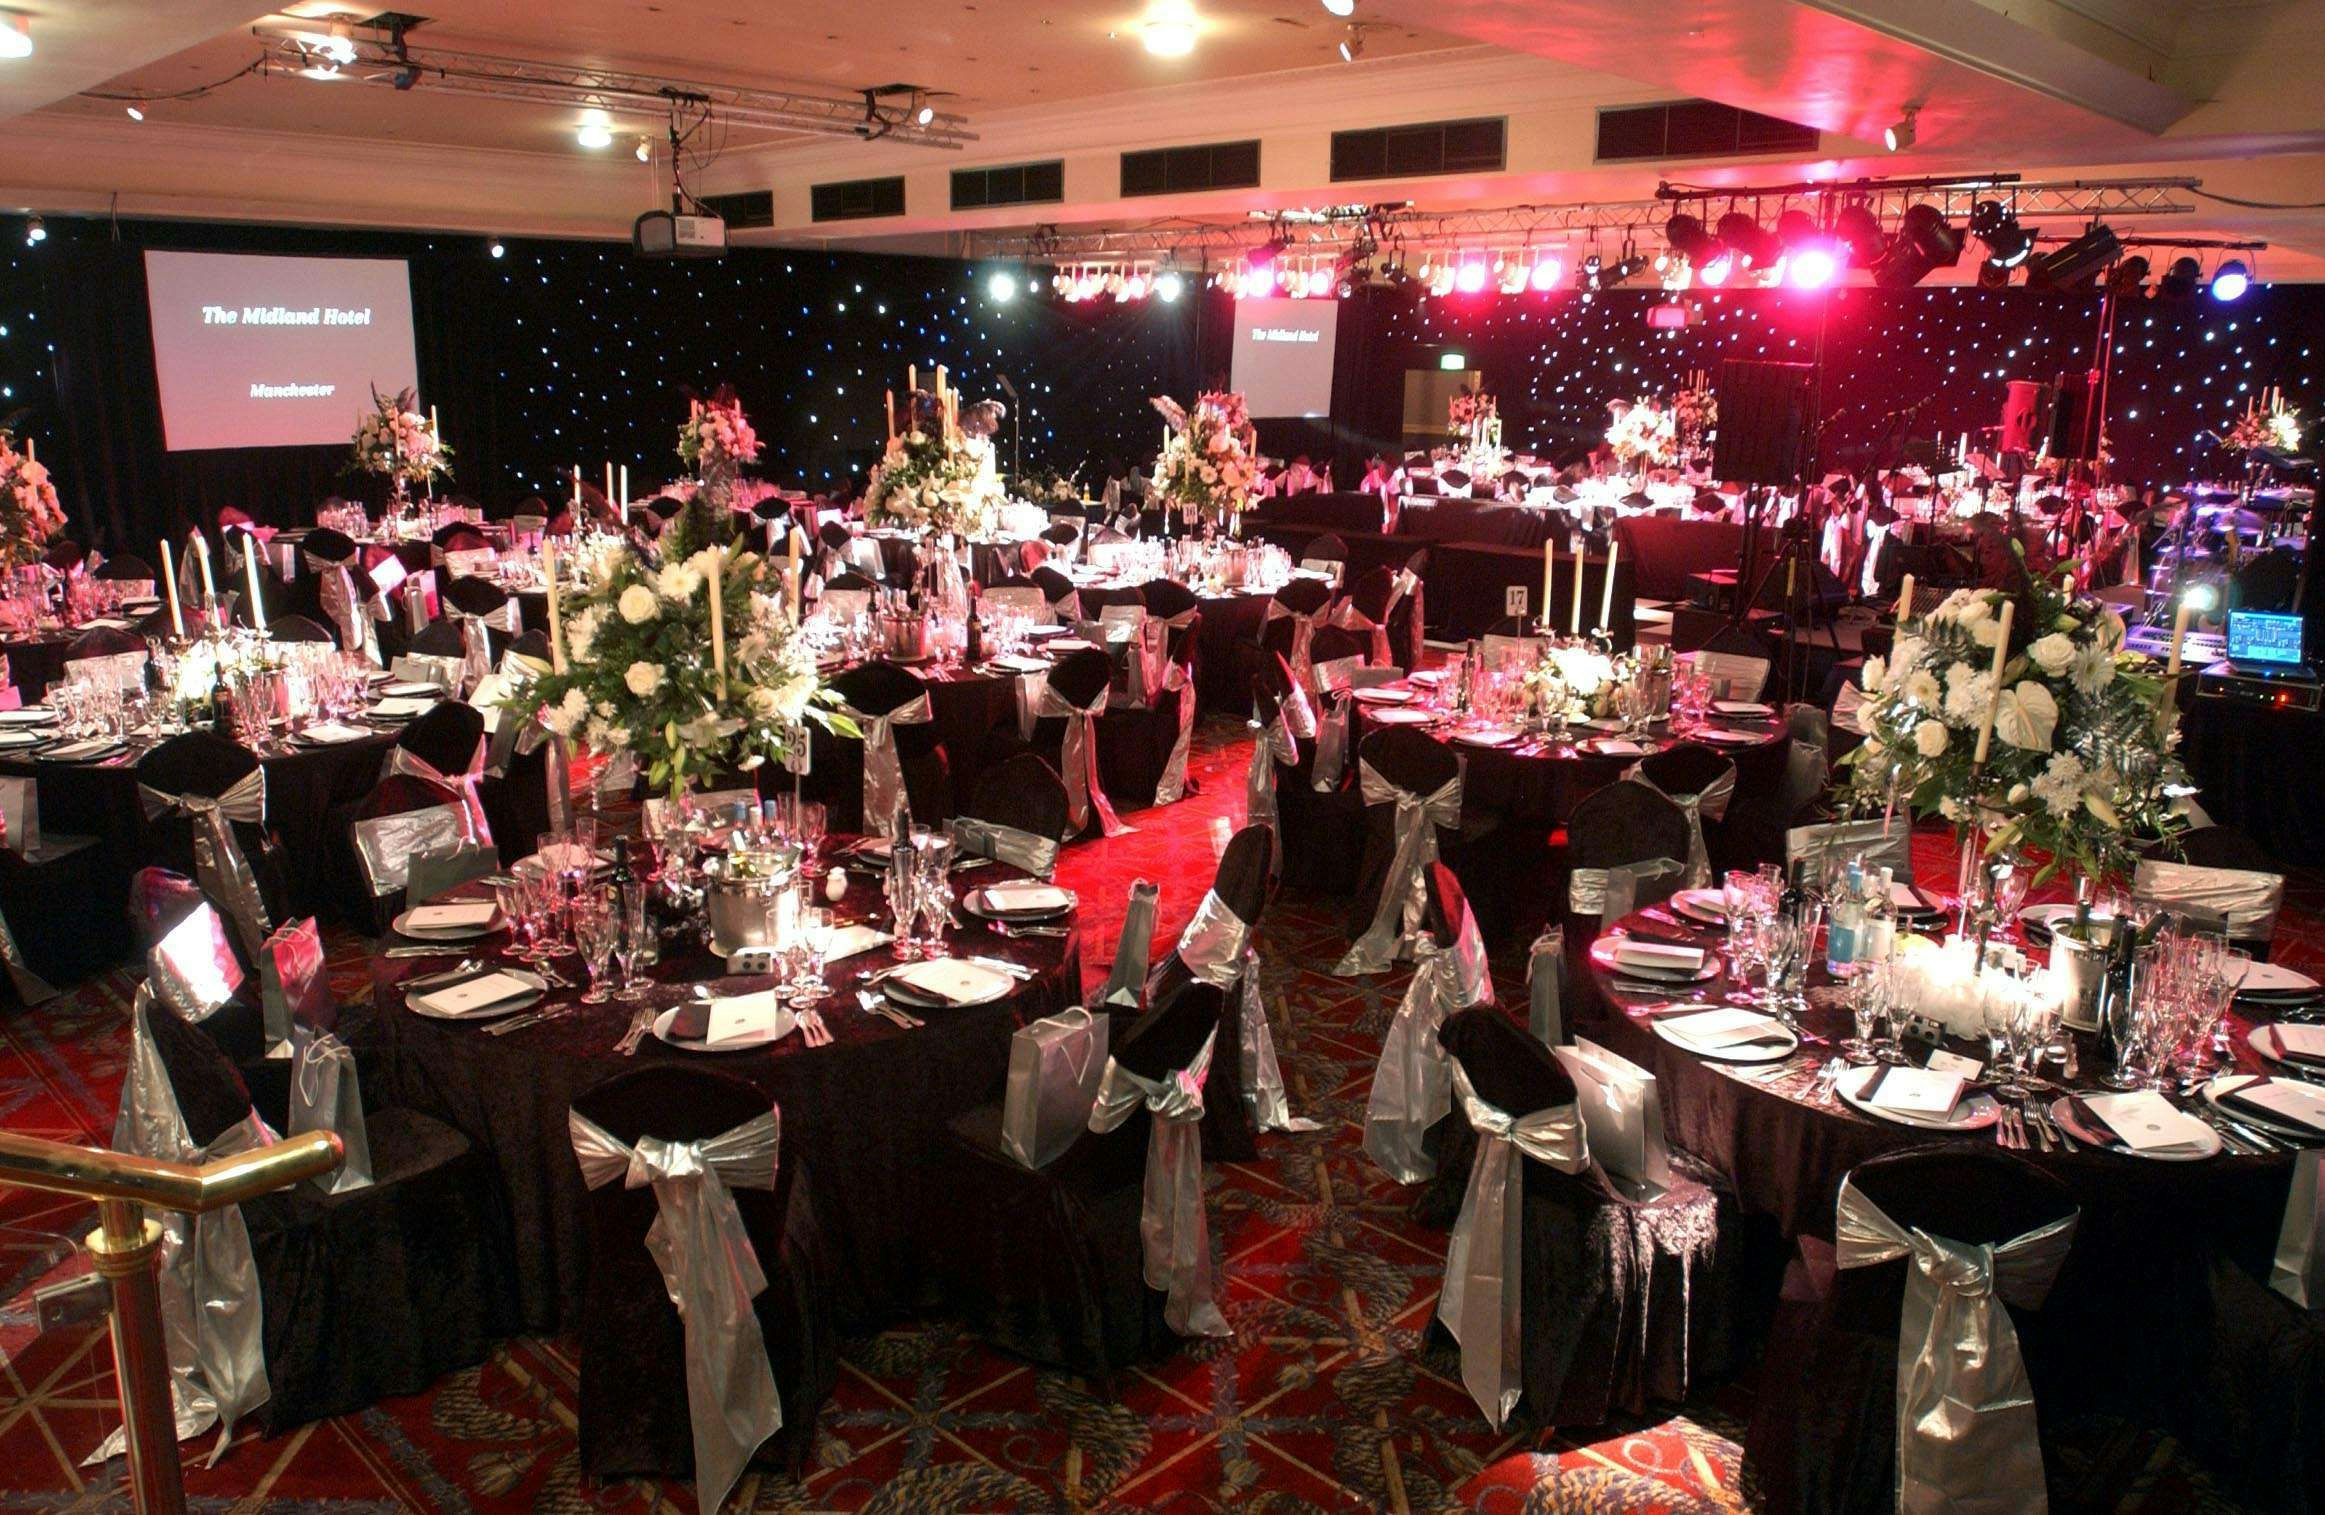 Banqueting Venues in Manchester - The Midland Manchester